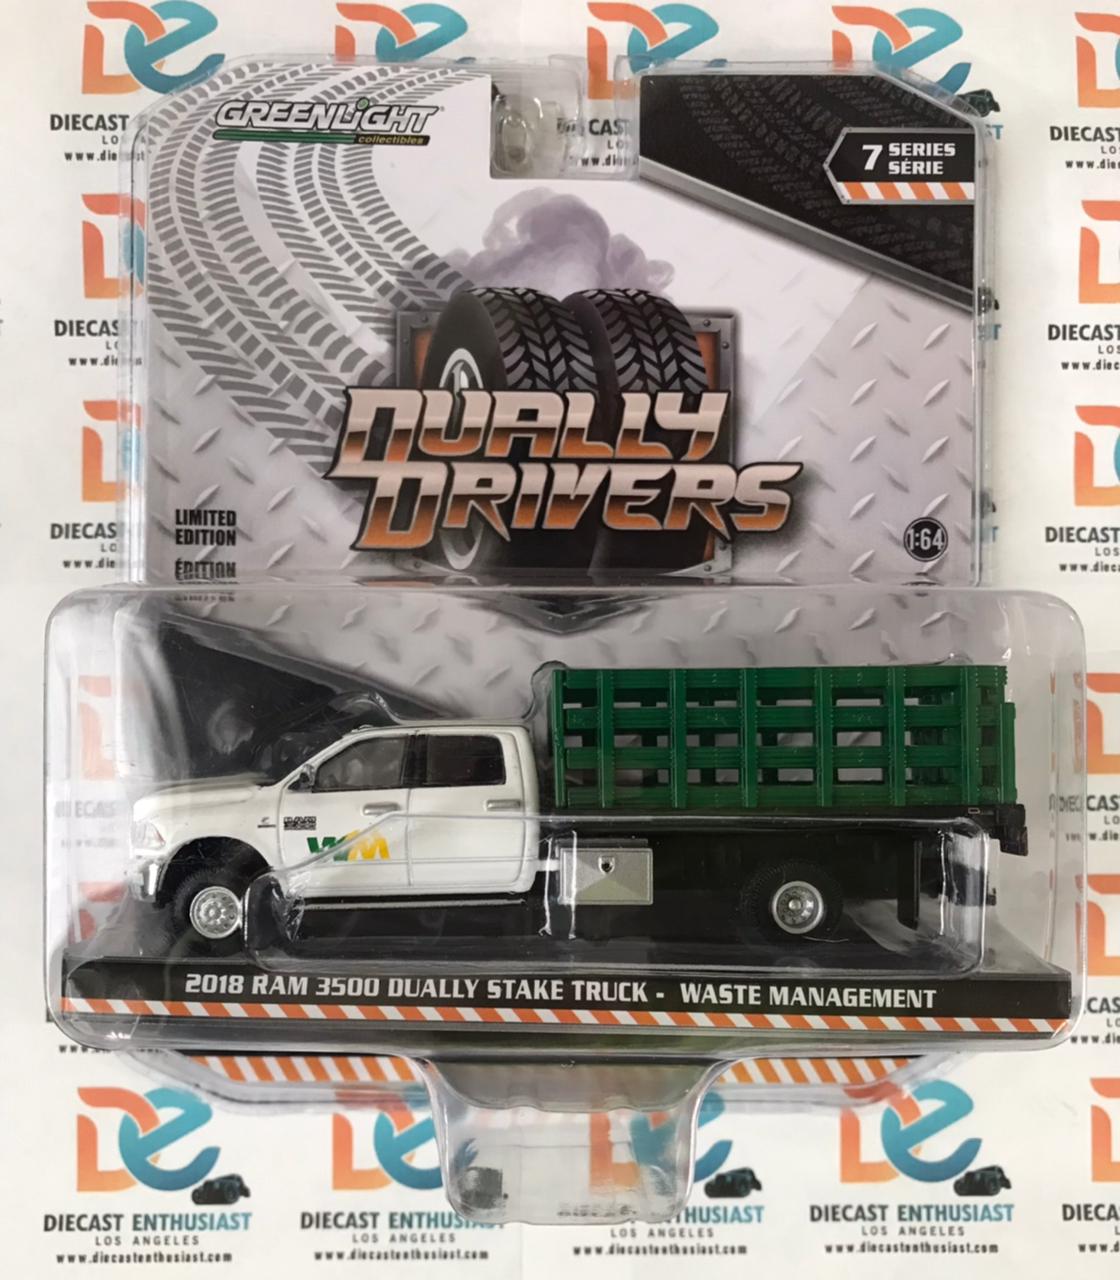 Greenlight Dually Drivers 2018 Ram 3500 Dually Stake Truck Waste Management 1:64 1:64